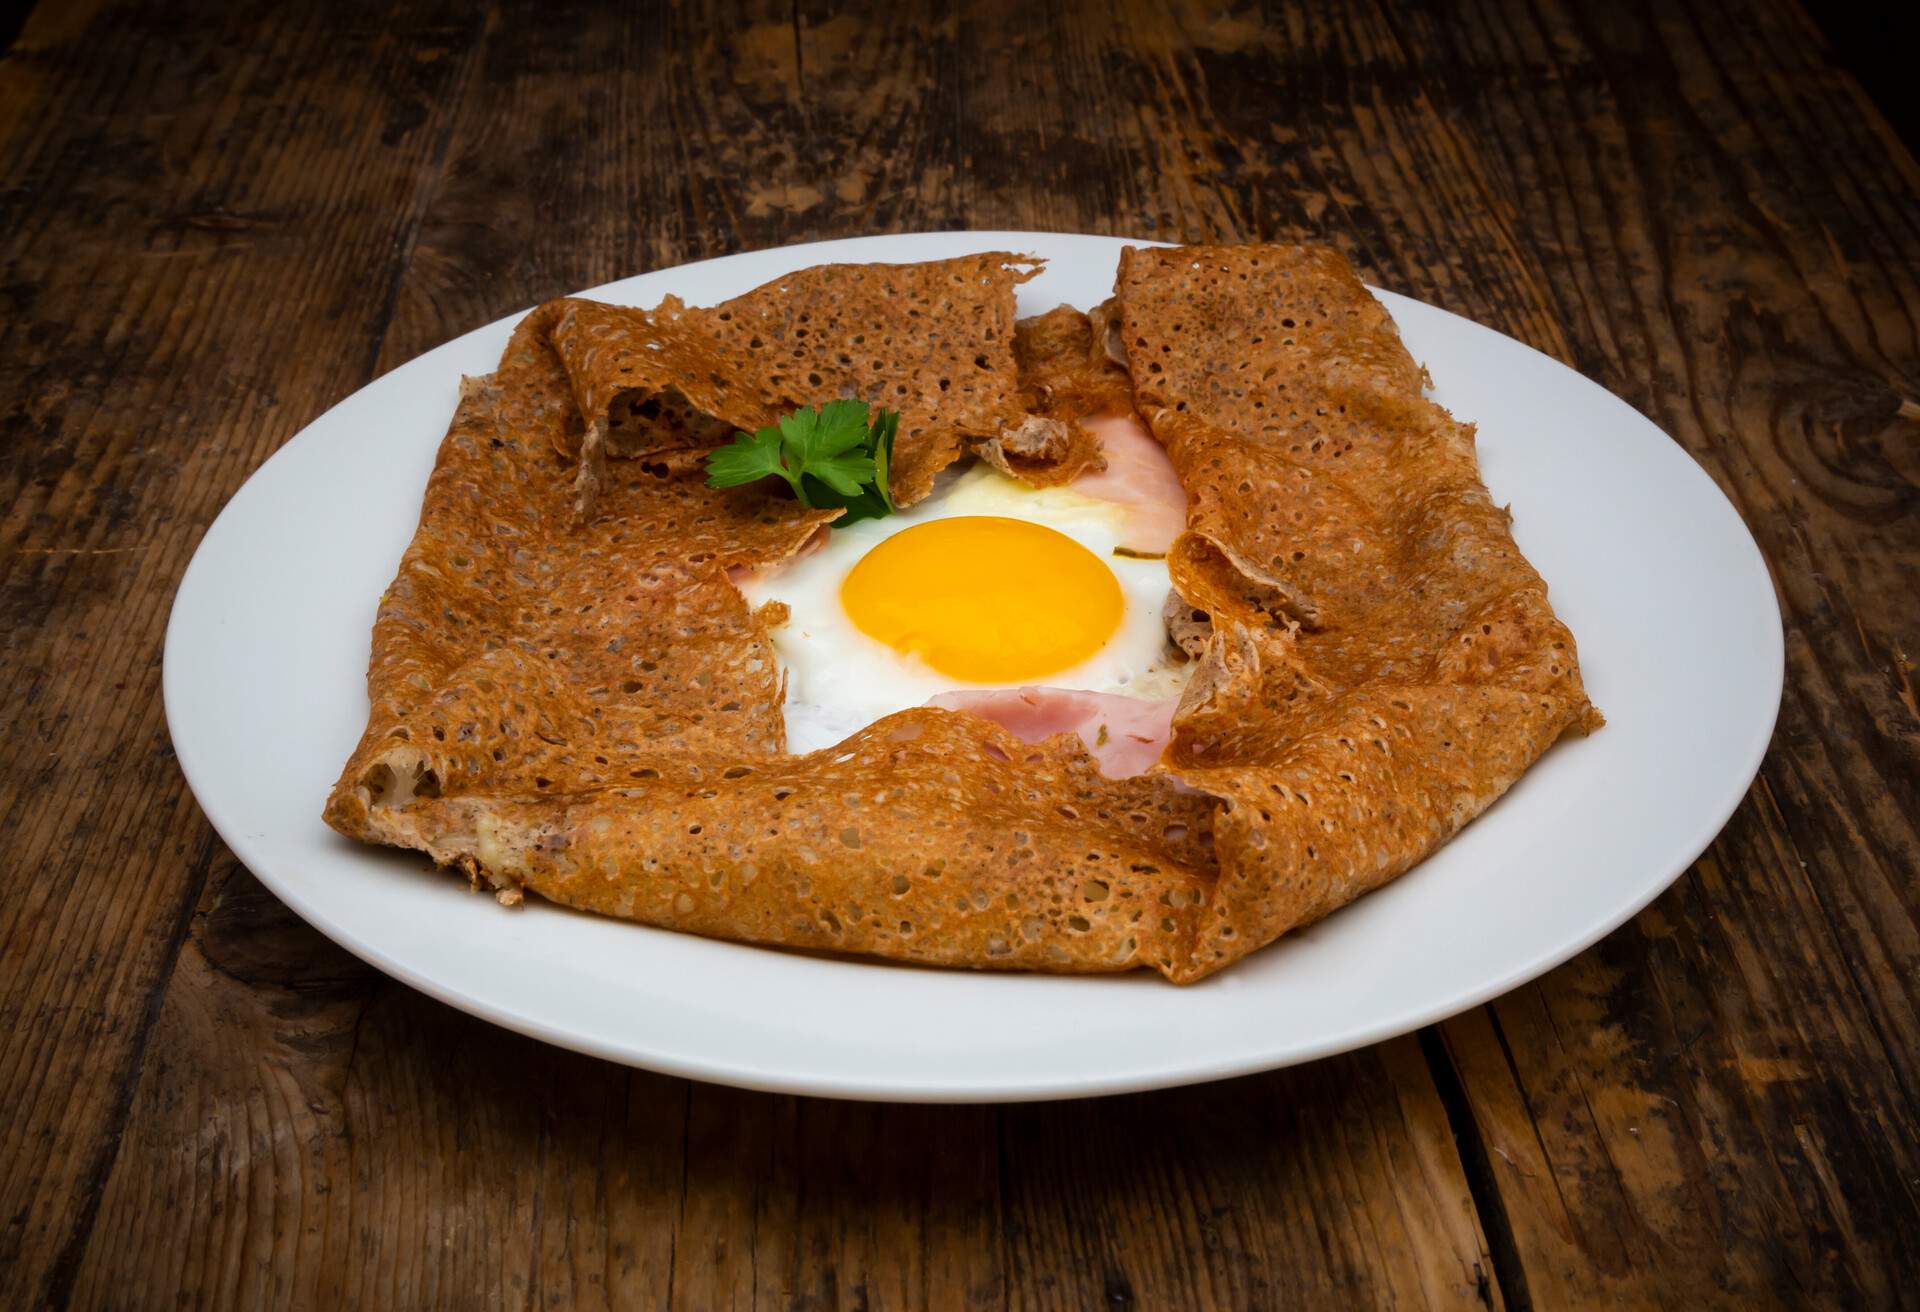 A ham and egg galette served in a white plate.